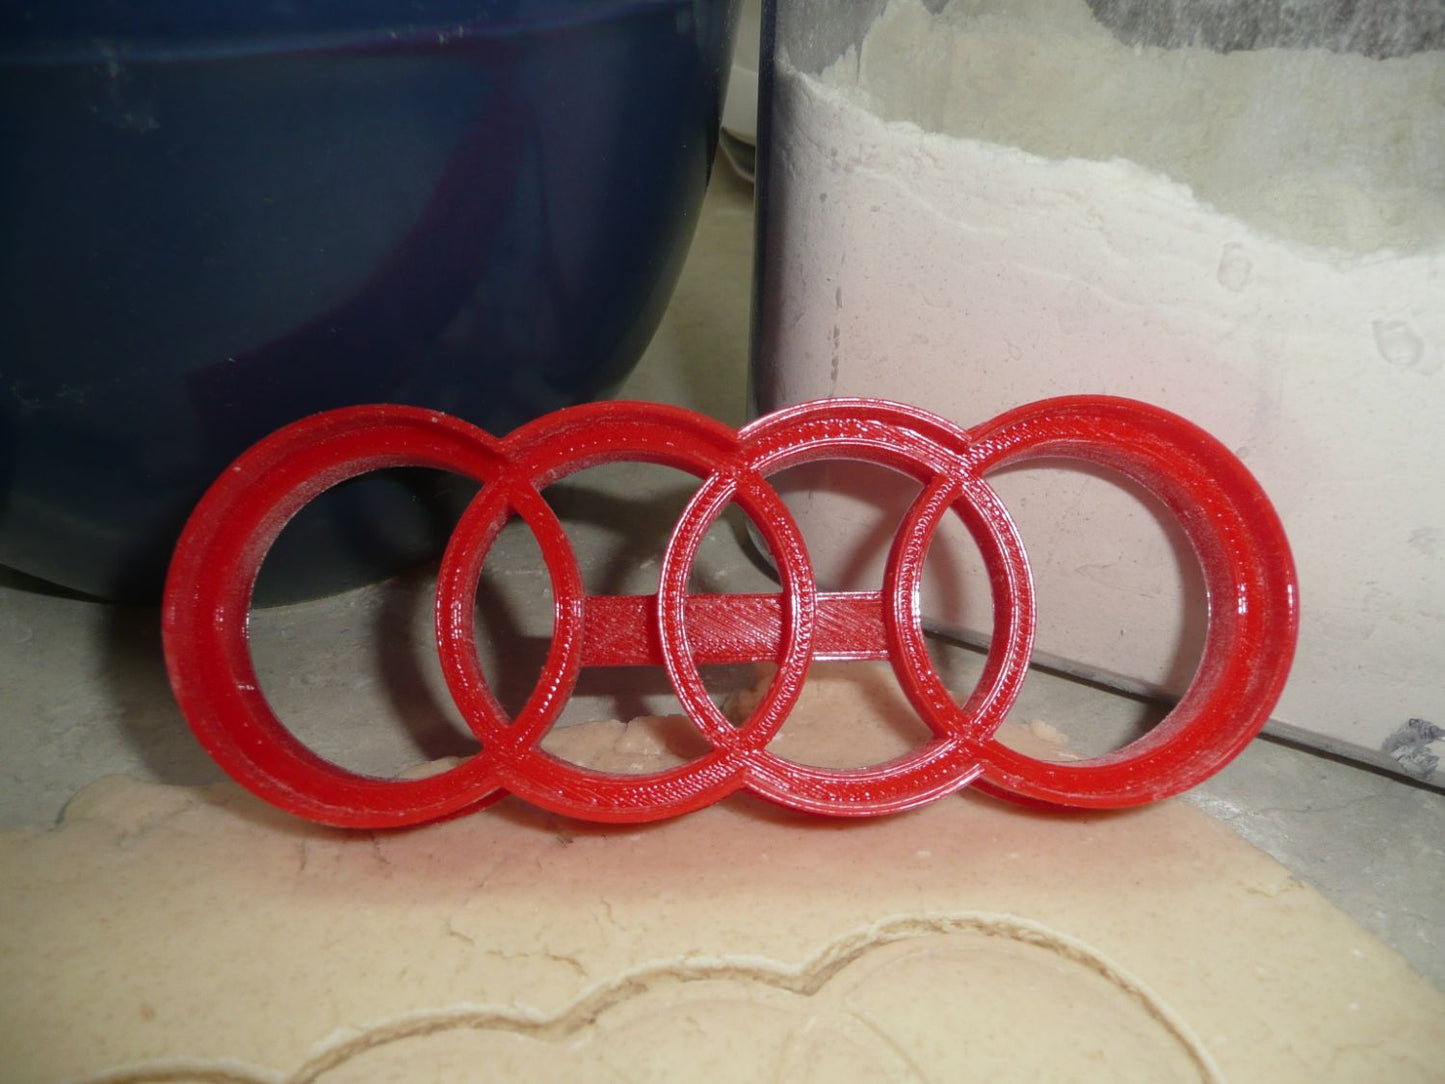 Audi Luxury Vehicle Iconic Symbol Cookie Cutter Made In USA PR4541